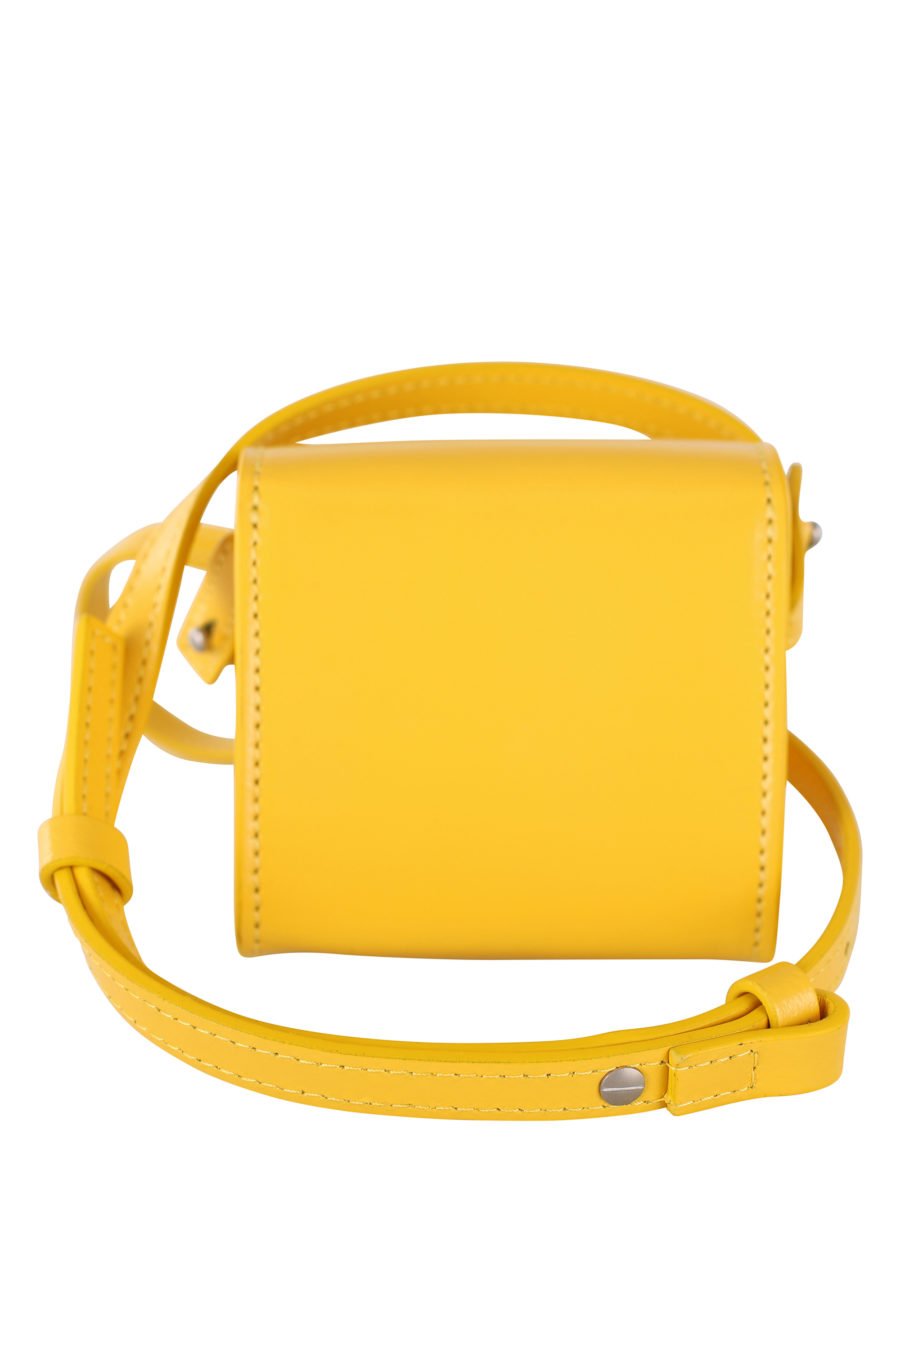 Yellow mini shoulder bag with metal lettering logo - IMG 1965